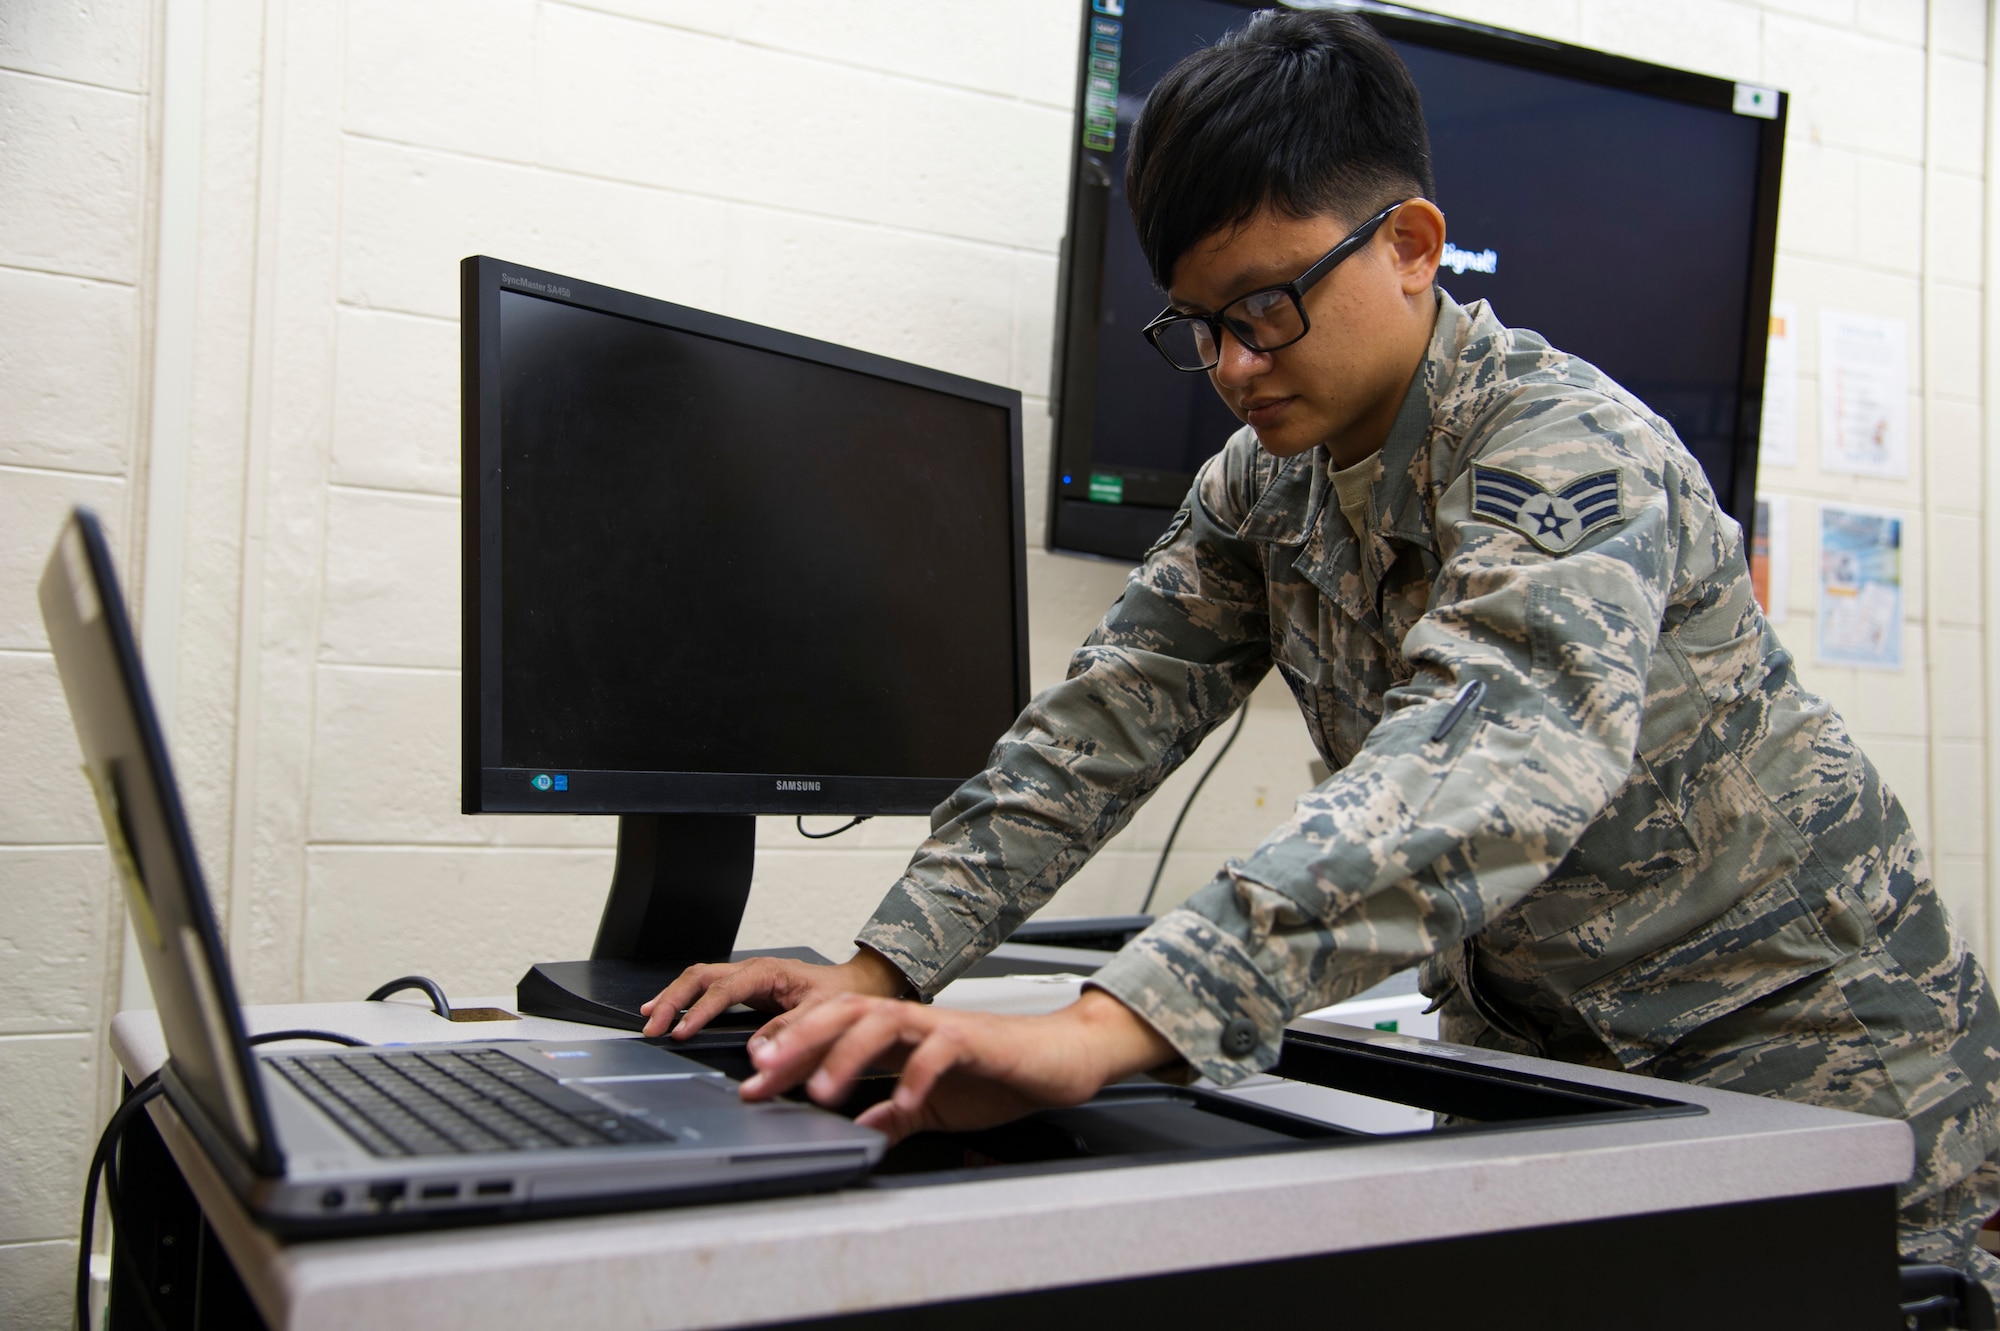 U.S. Air Force Senior Airman Jamie Matanane, a Reserve Citizen Airman with the 624th Regional Support Group Knowledge Operations Management alternate operating location in Guam, tests newly installed electronic components during a rebuild for an outdated testing station March 9, 2018, at Andersen Air Force Base, Guam. Five testing stations, which are used for individual Professional Military Education and career field upgrade testing, were rebuilt and restored to improve 624th RSG Test Control Office capabilities and sustainability for Reserve Citizen Airmen in Guam. (U.S. Air Force photo by Jerry R. Bynum)